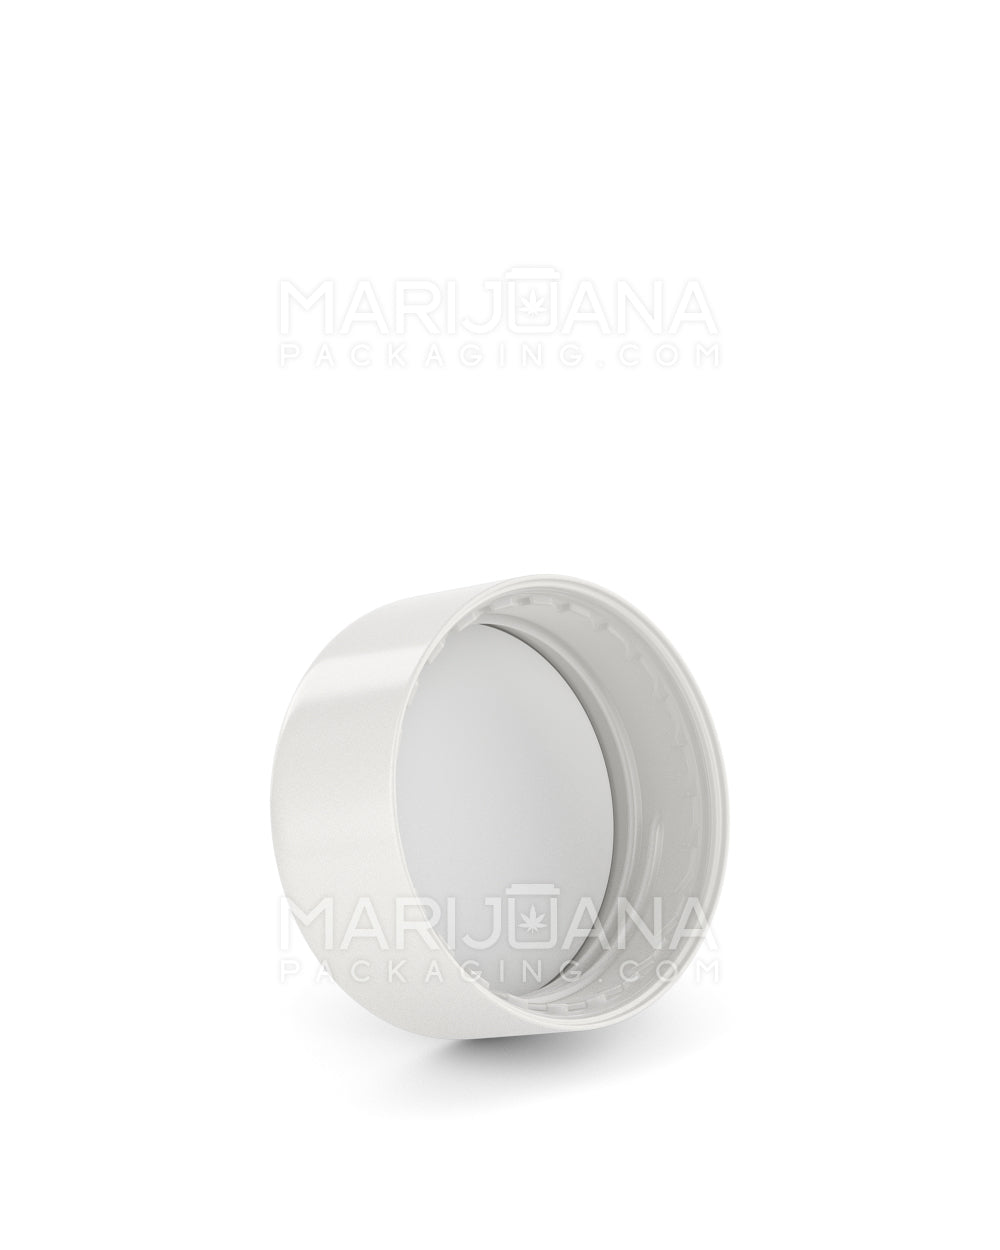 Child Resistant | Smooth Flat Push Down & Turn Plastic Caps w/ Foam Liner | 29mm - Glossy White - 300 Count - 2